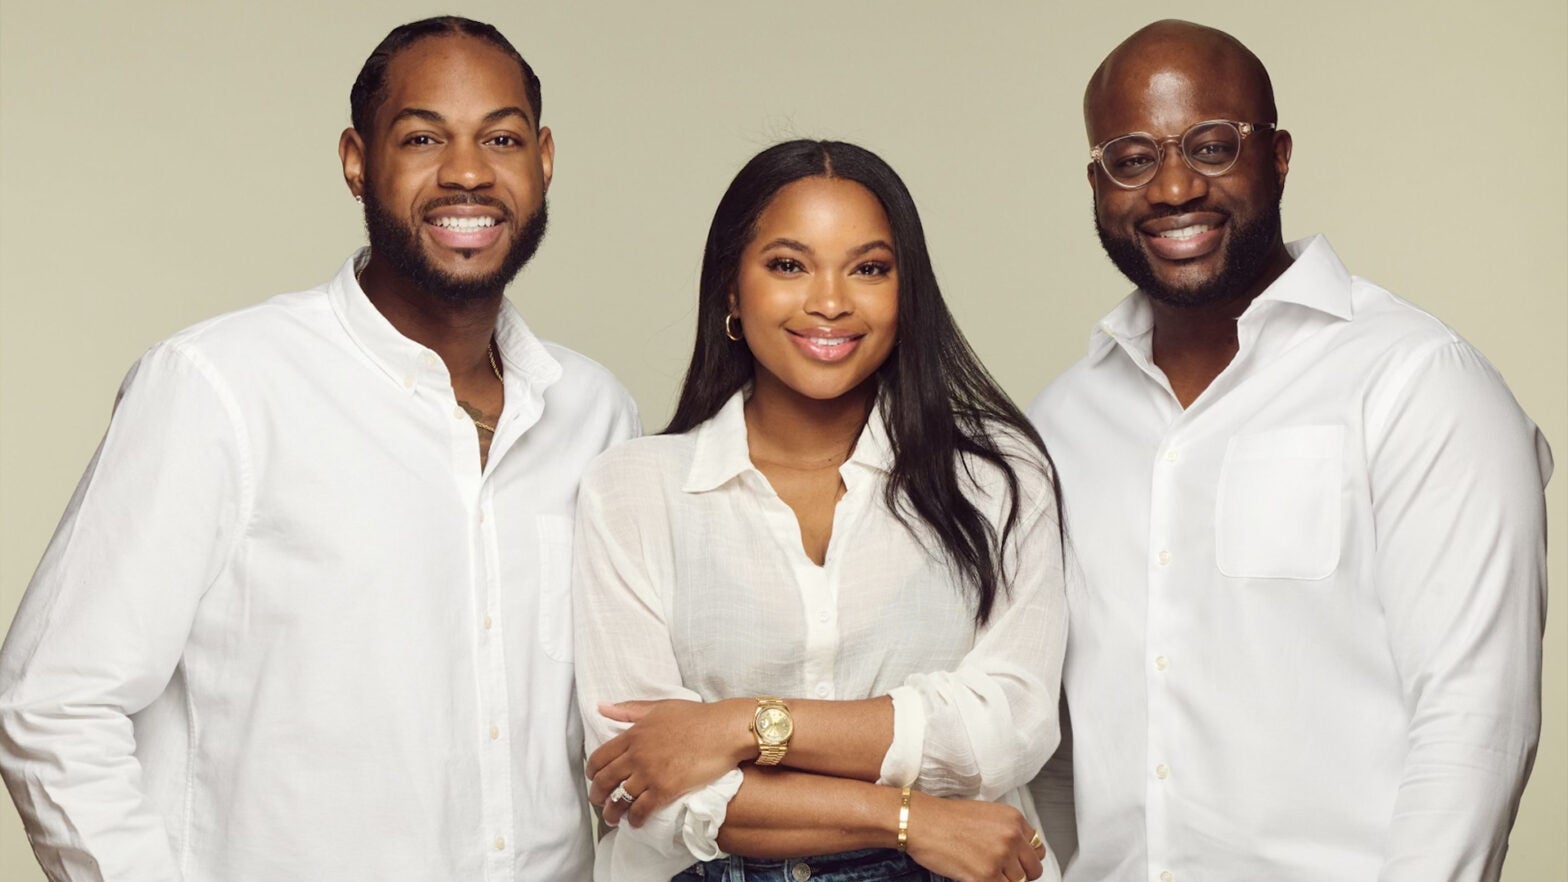 Dr. Q, Dentist To Glorilla Among Others Celebs, Is The Youngest Black Dental Practice Owner